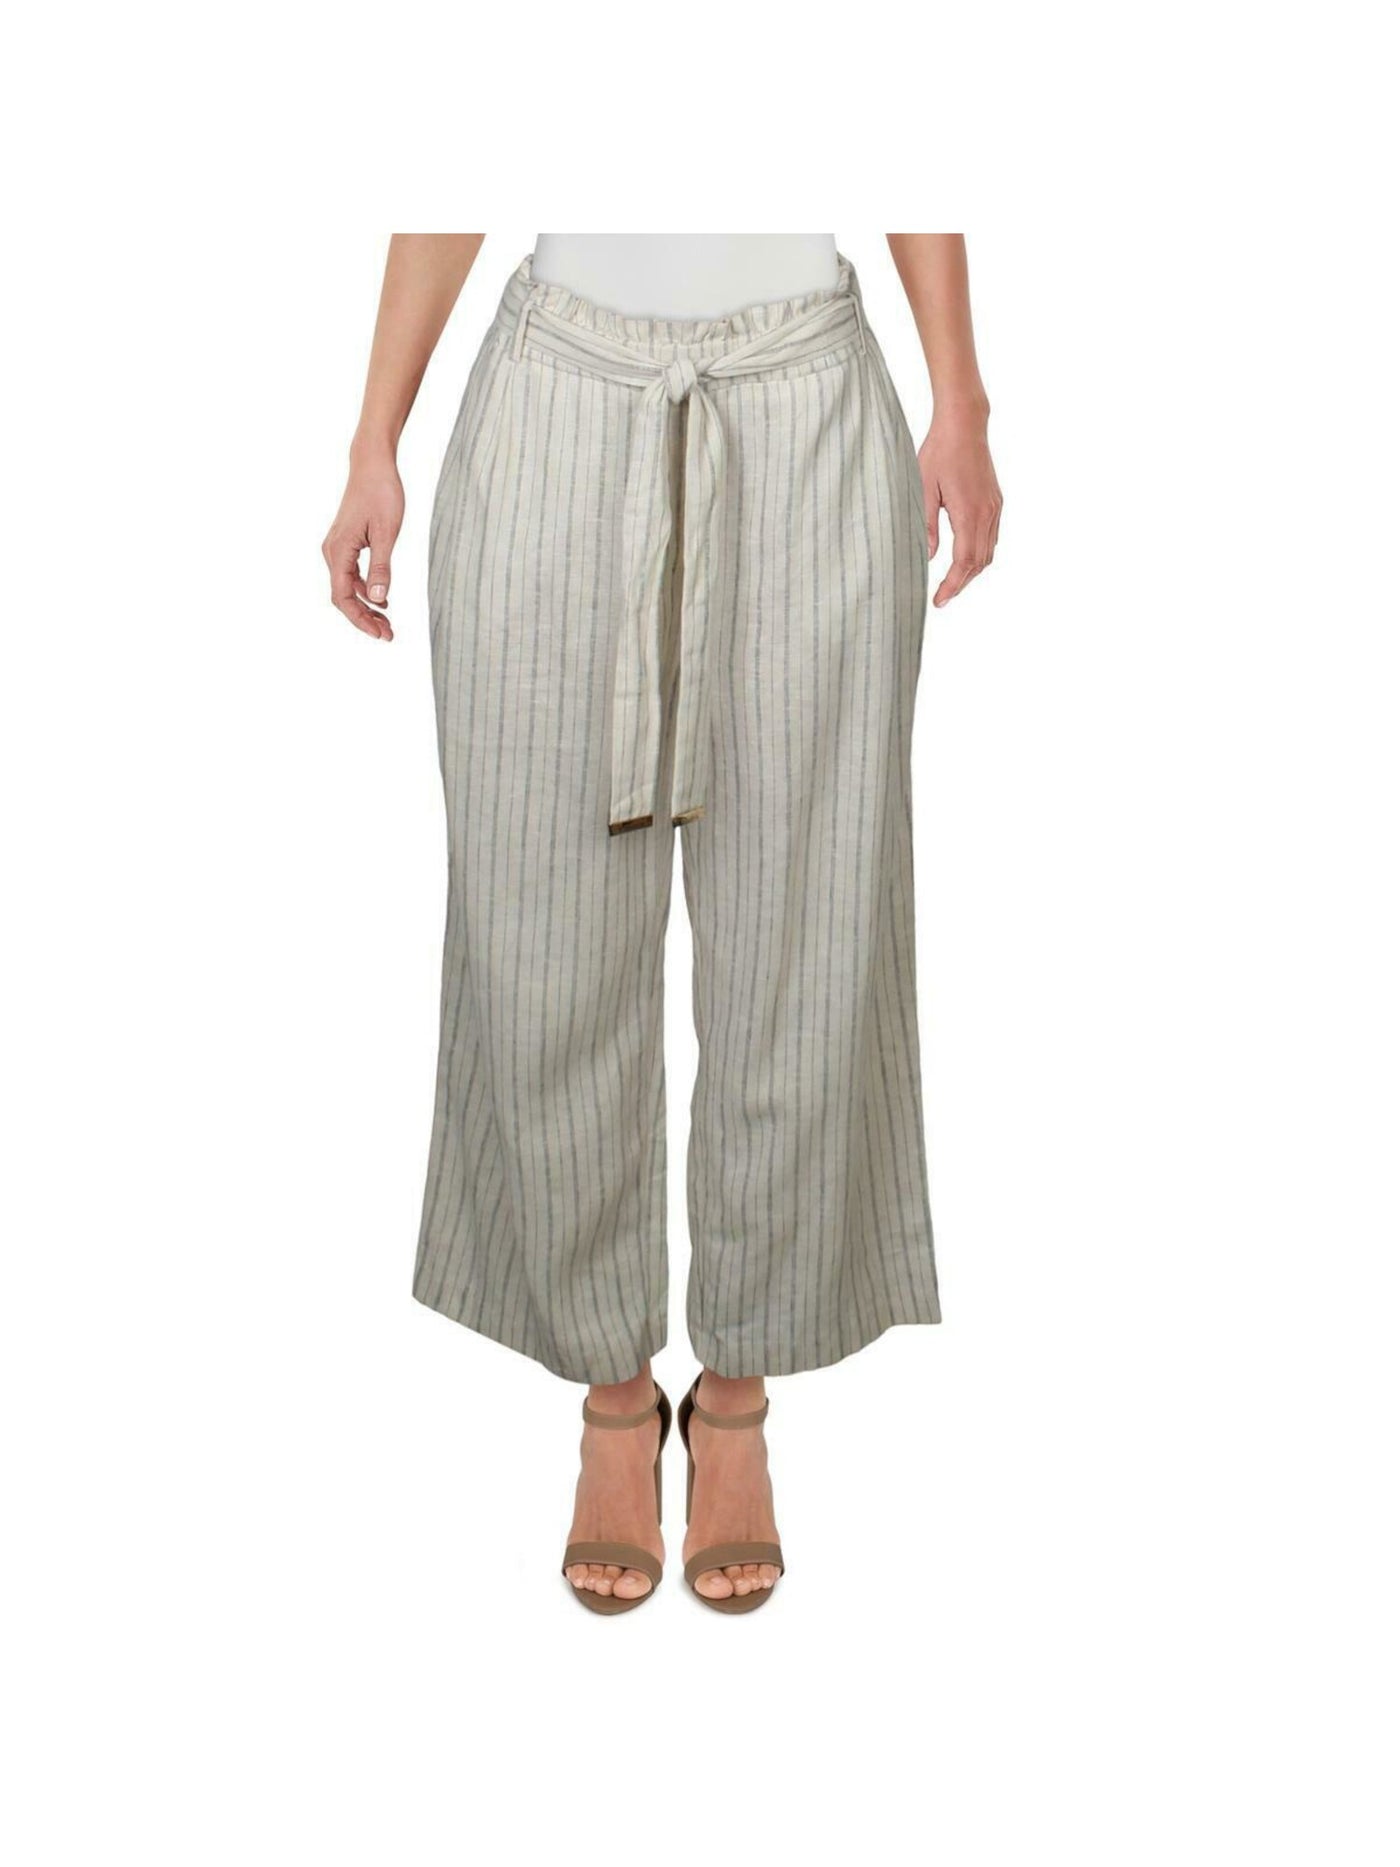 CALVIN KLEIN Womens Beige Gathered Tie Mid Rise Linen Paperbag Striped Wear To Work Cropped Pants XL